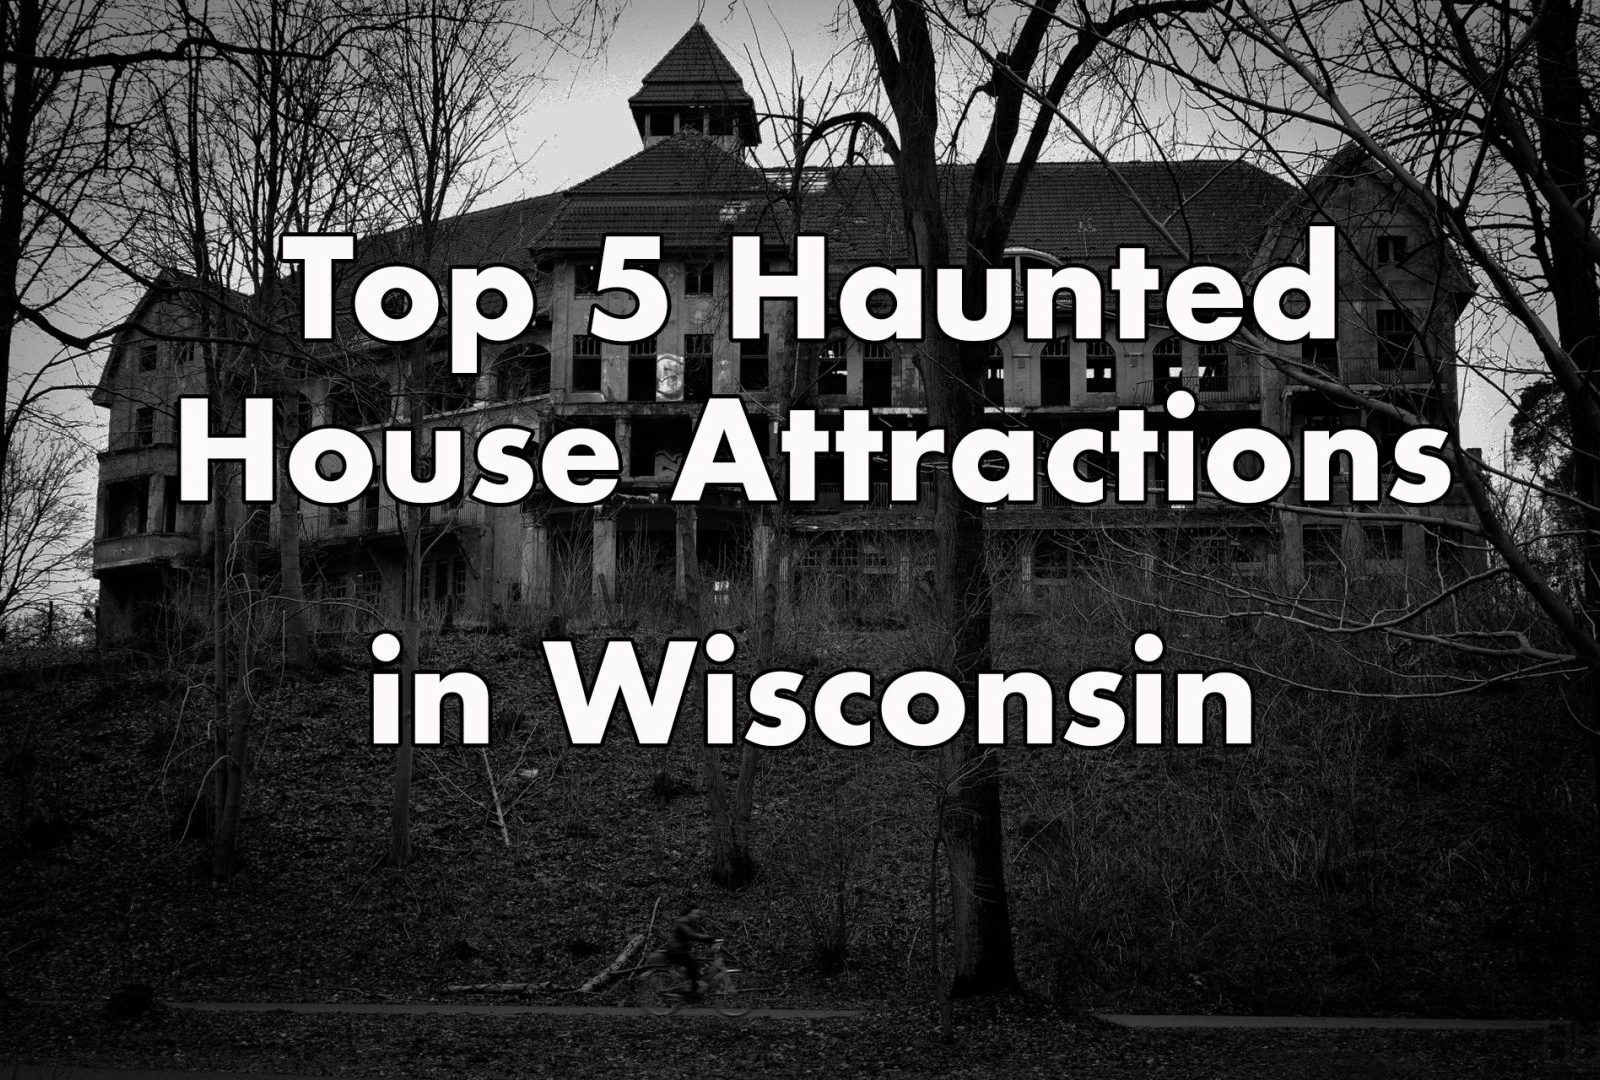 Traditions’ Top 5 List of Haunted House Attractions in Wisconsin